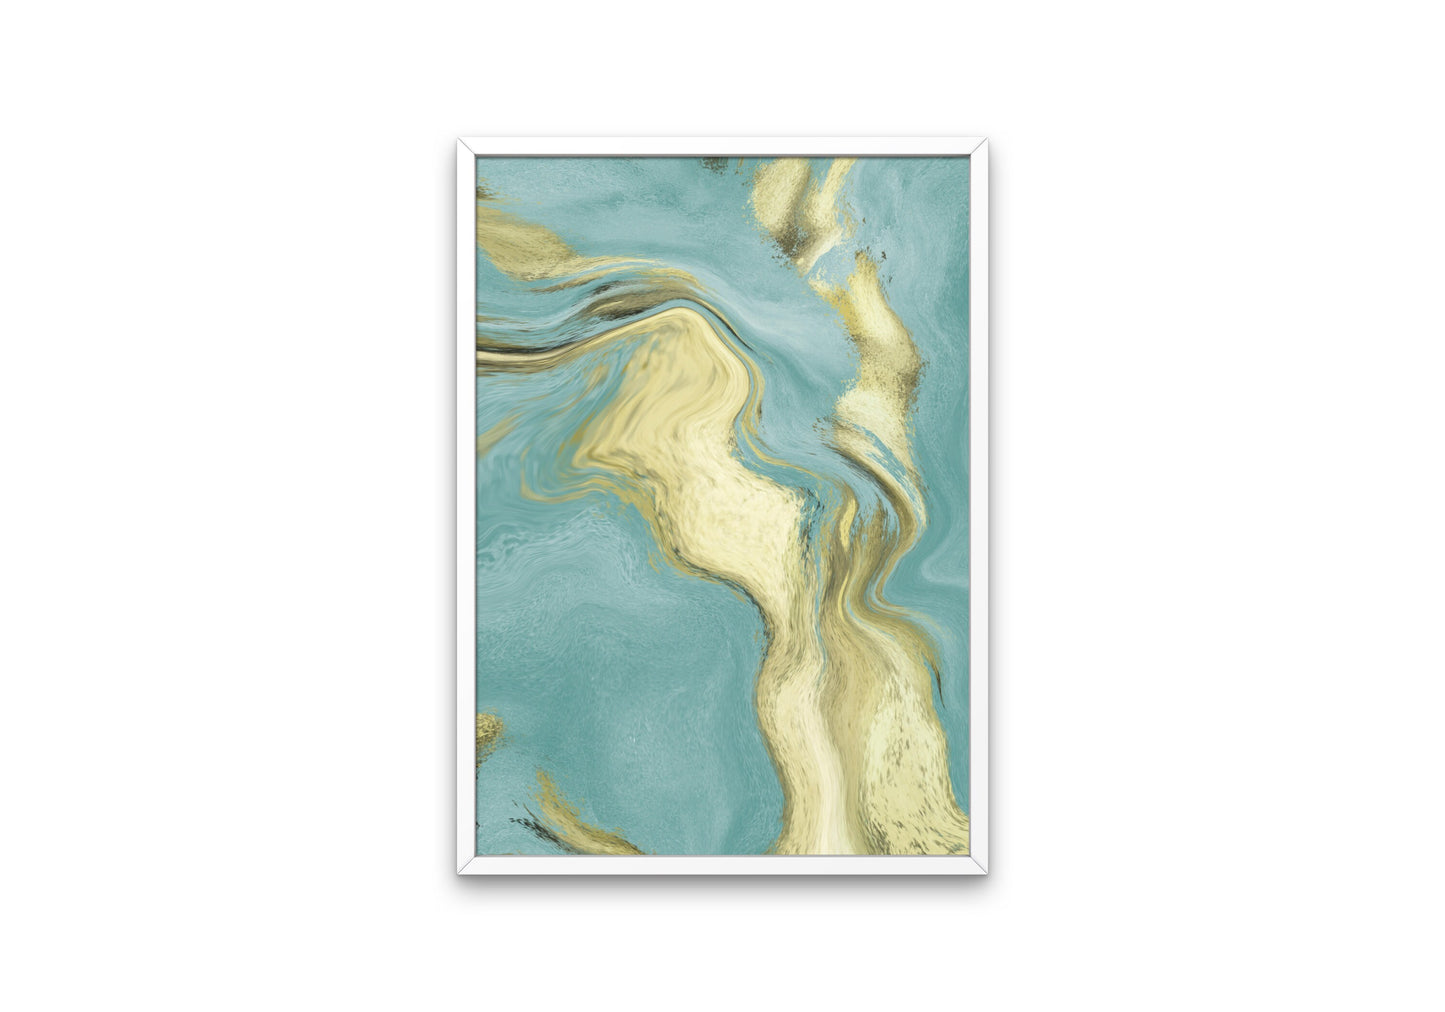 Turquoise Golden Coastal Abstract Wall Art INSTANT DOWNLOAD, beachy decor, turquoise golden marble poster, Turquoise room décor, resin ocean